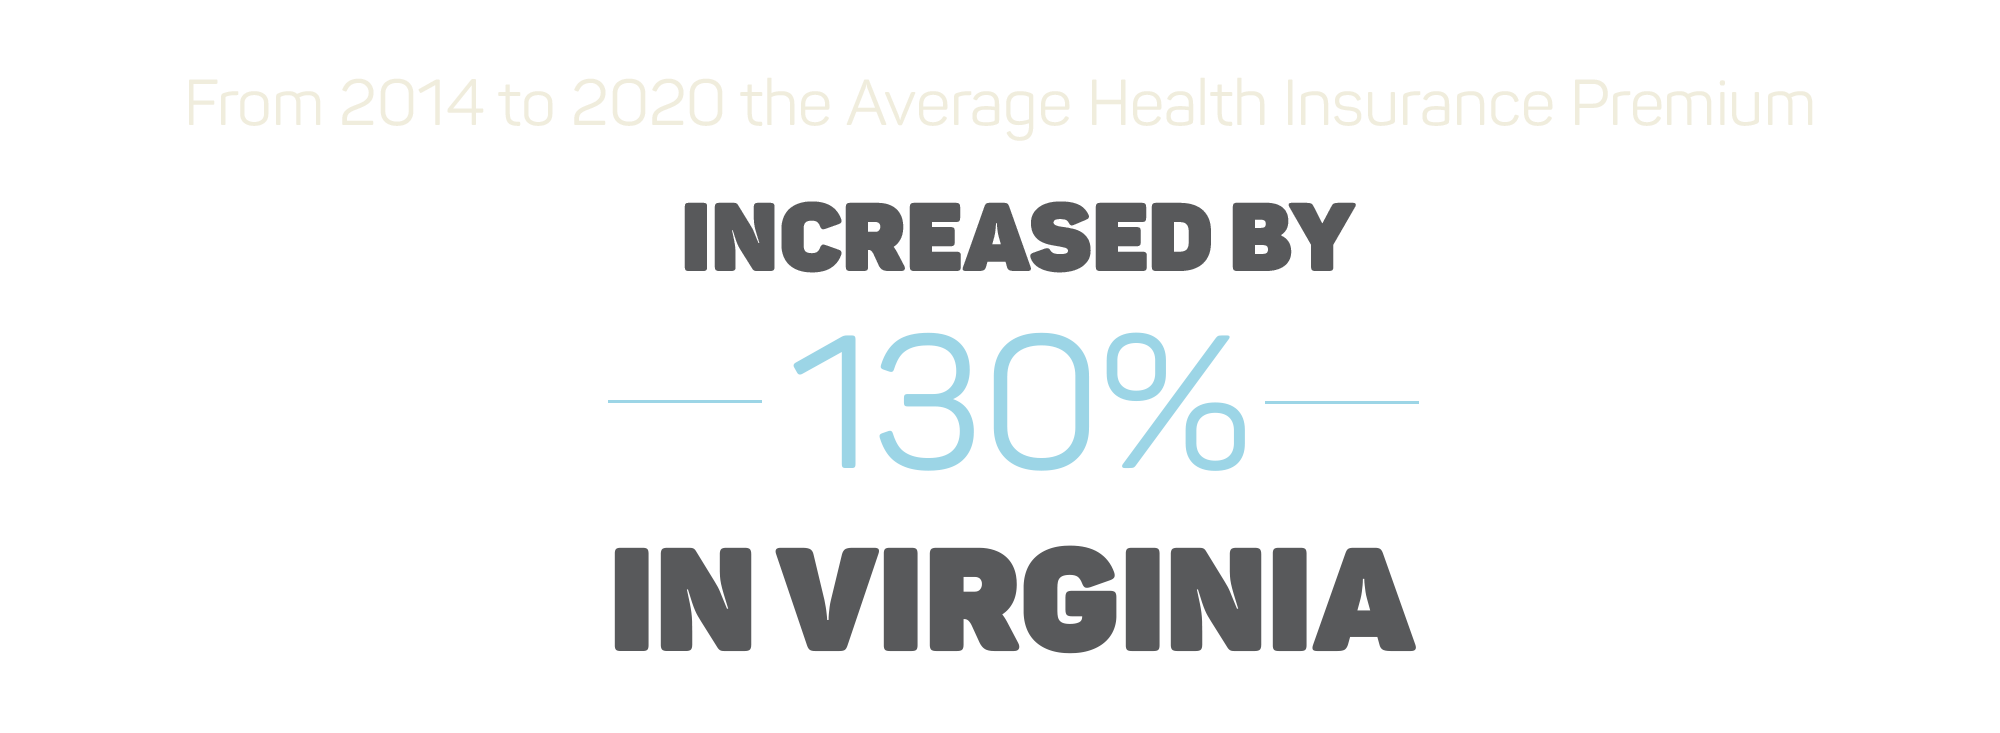 From 2014 to 2020 the average health insurance premium increased by 130% in Virginia